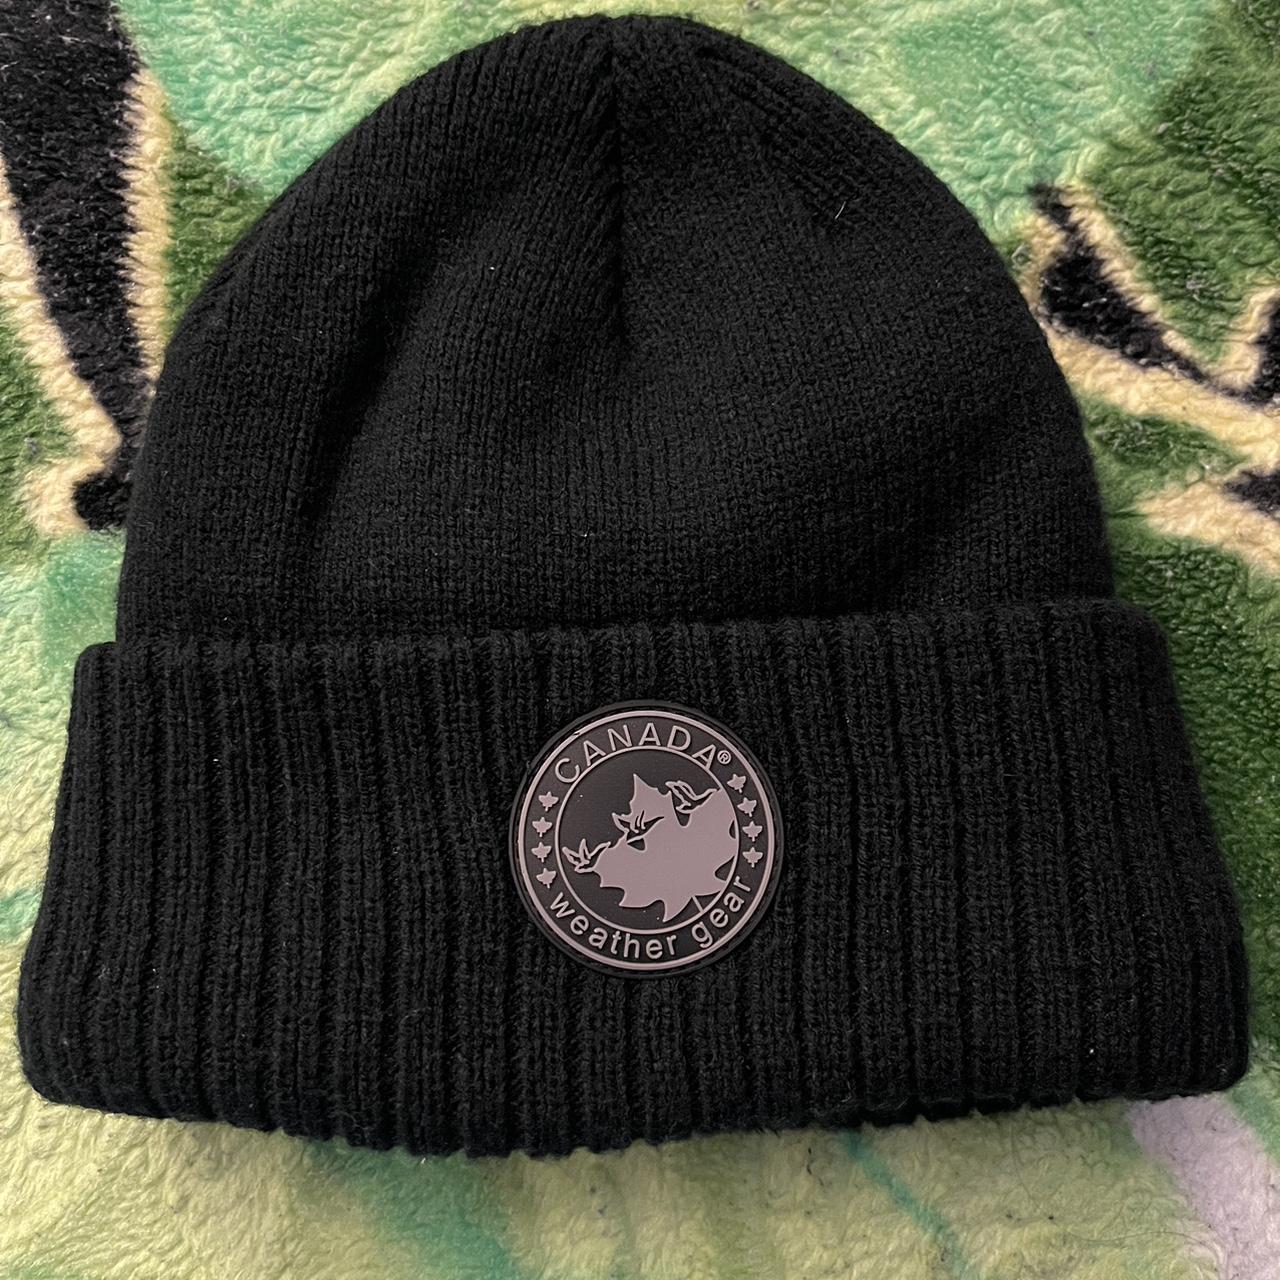 Selling a Canada Weather gear insulated beanie, Faux